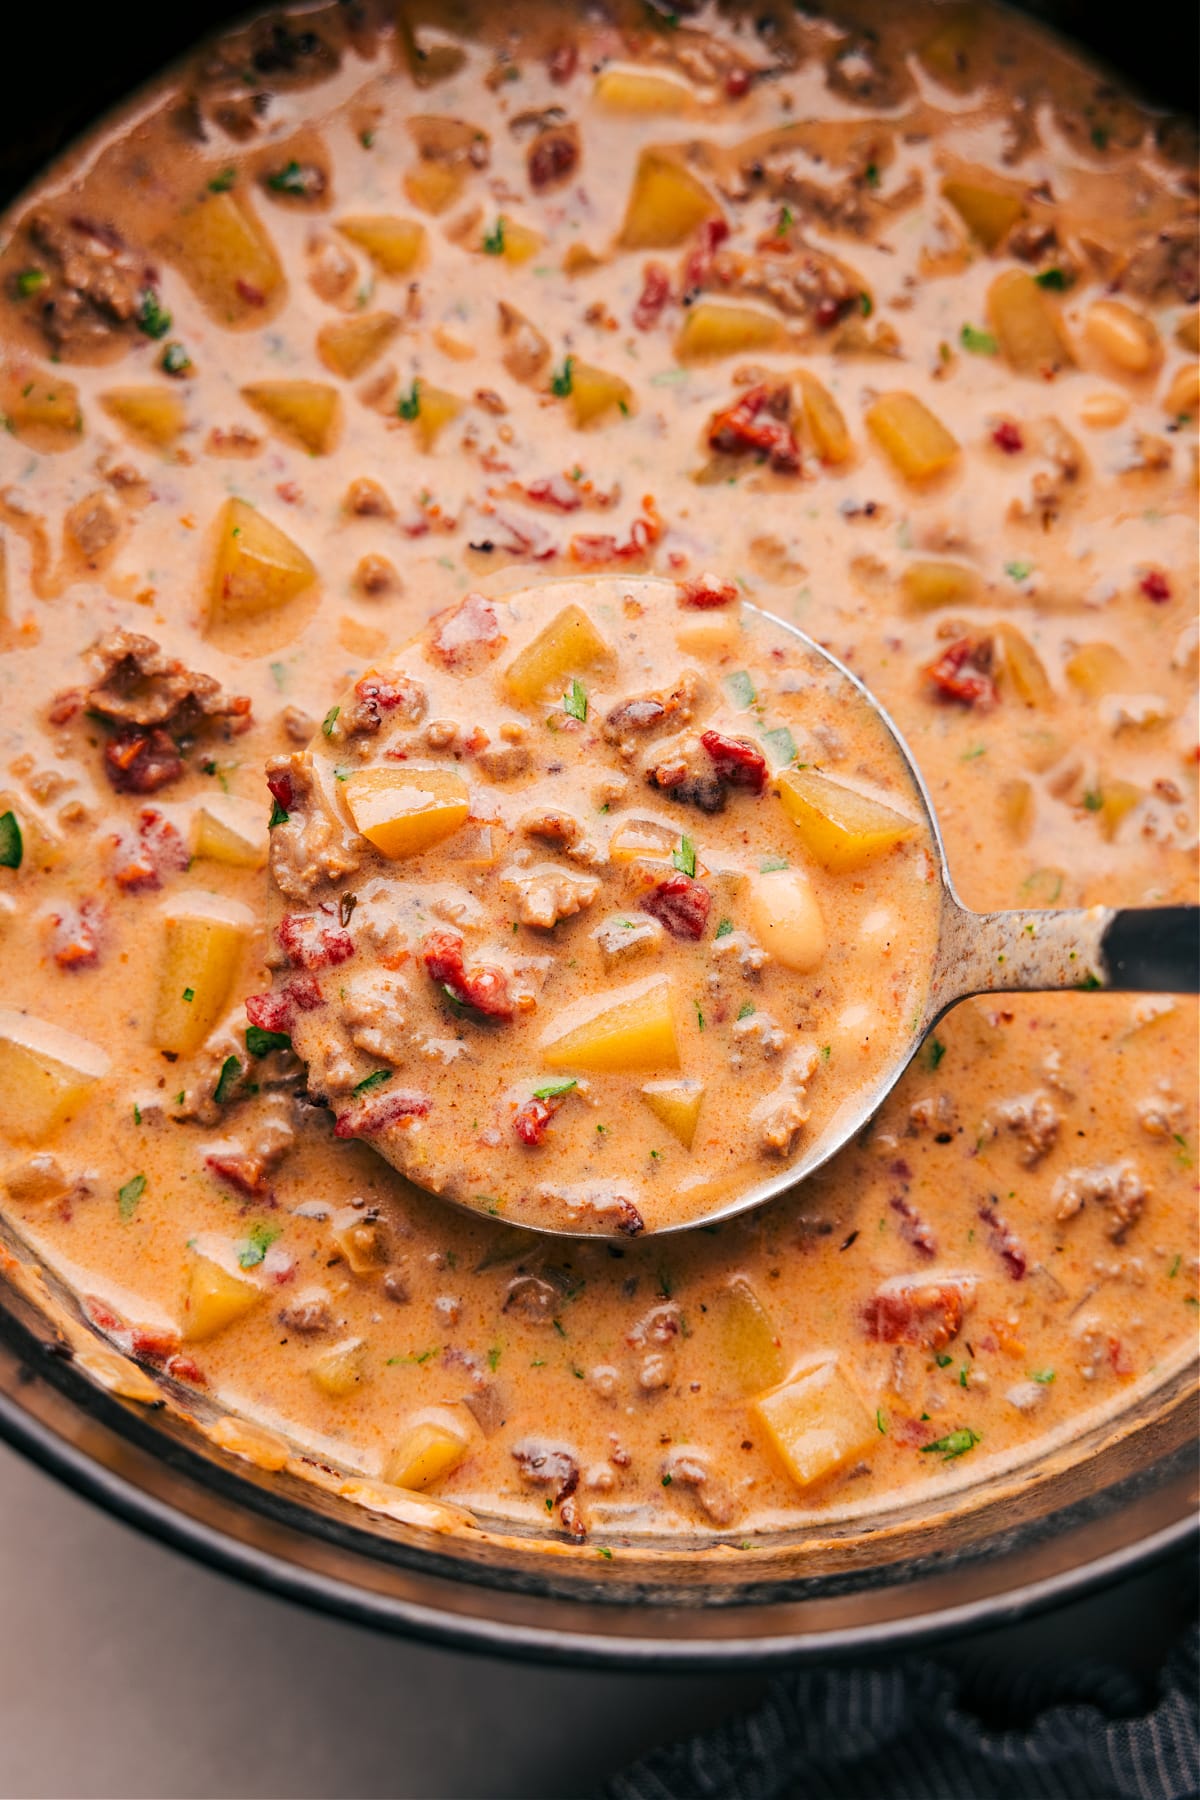 A pan filled with the finished tuscan sausage & potato soup, full of flavor and ingredients, warm and ready to be enjoyed as a delicious meal.